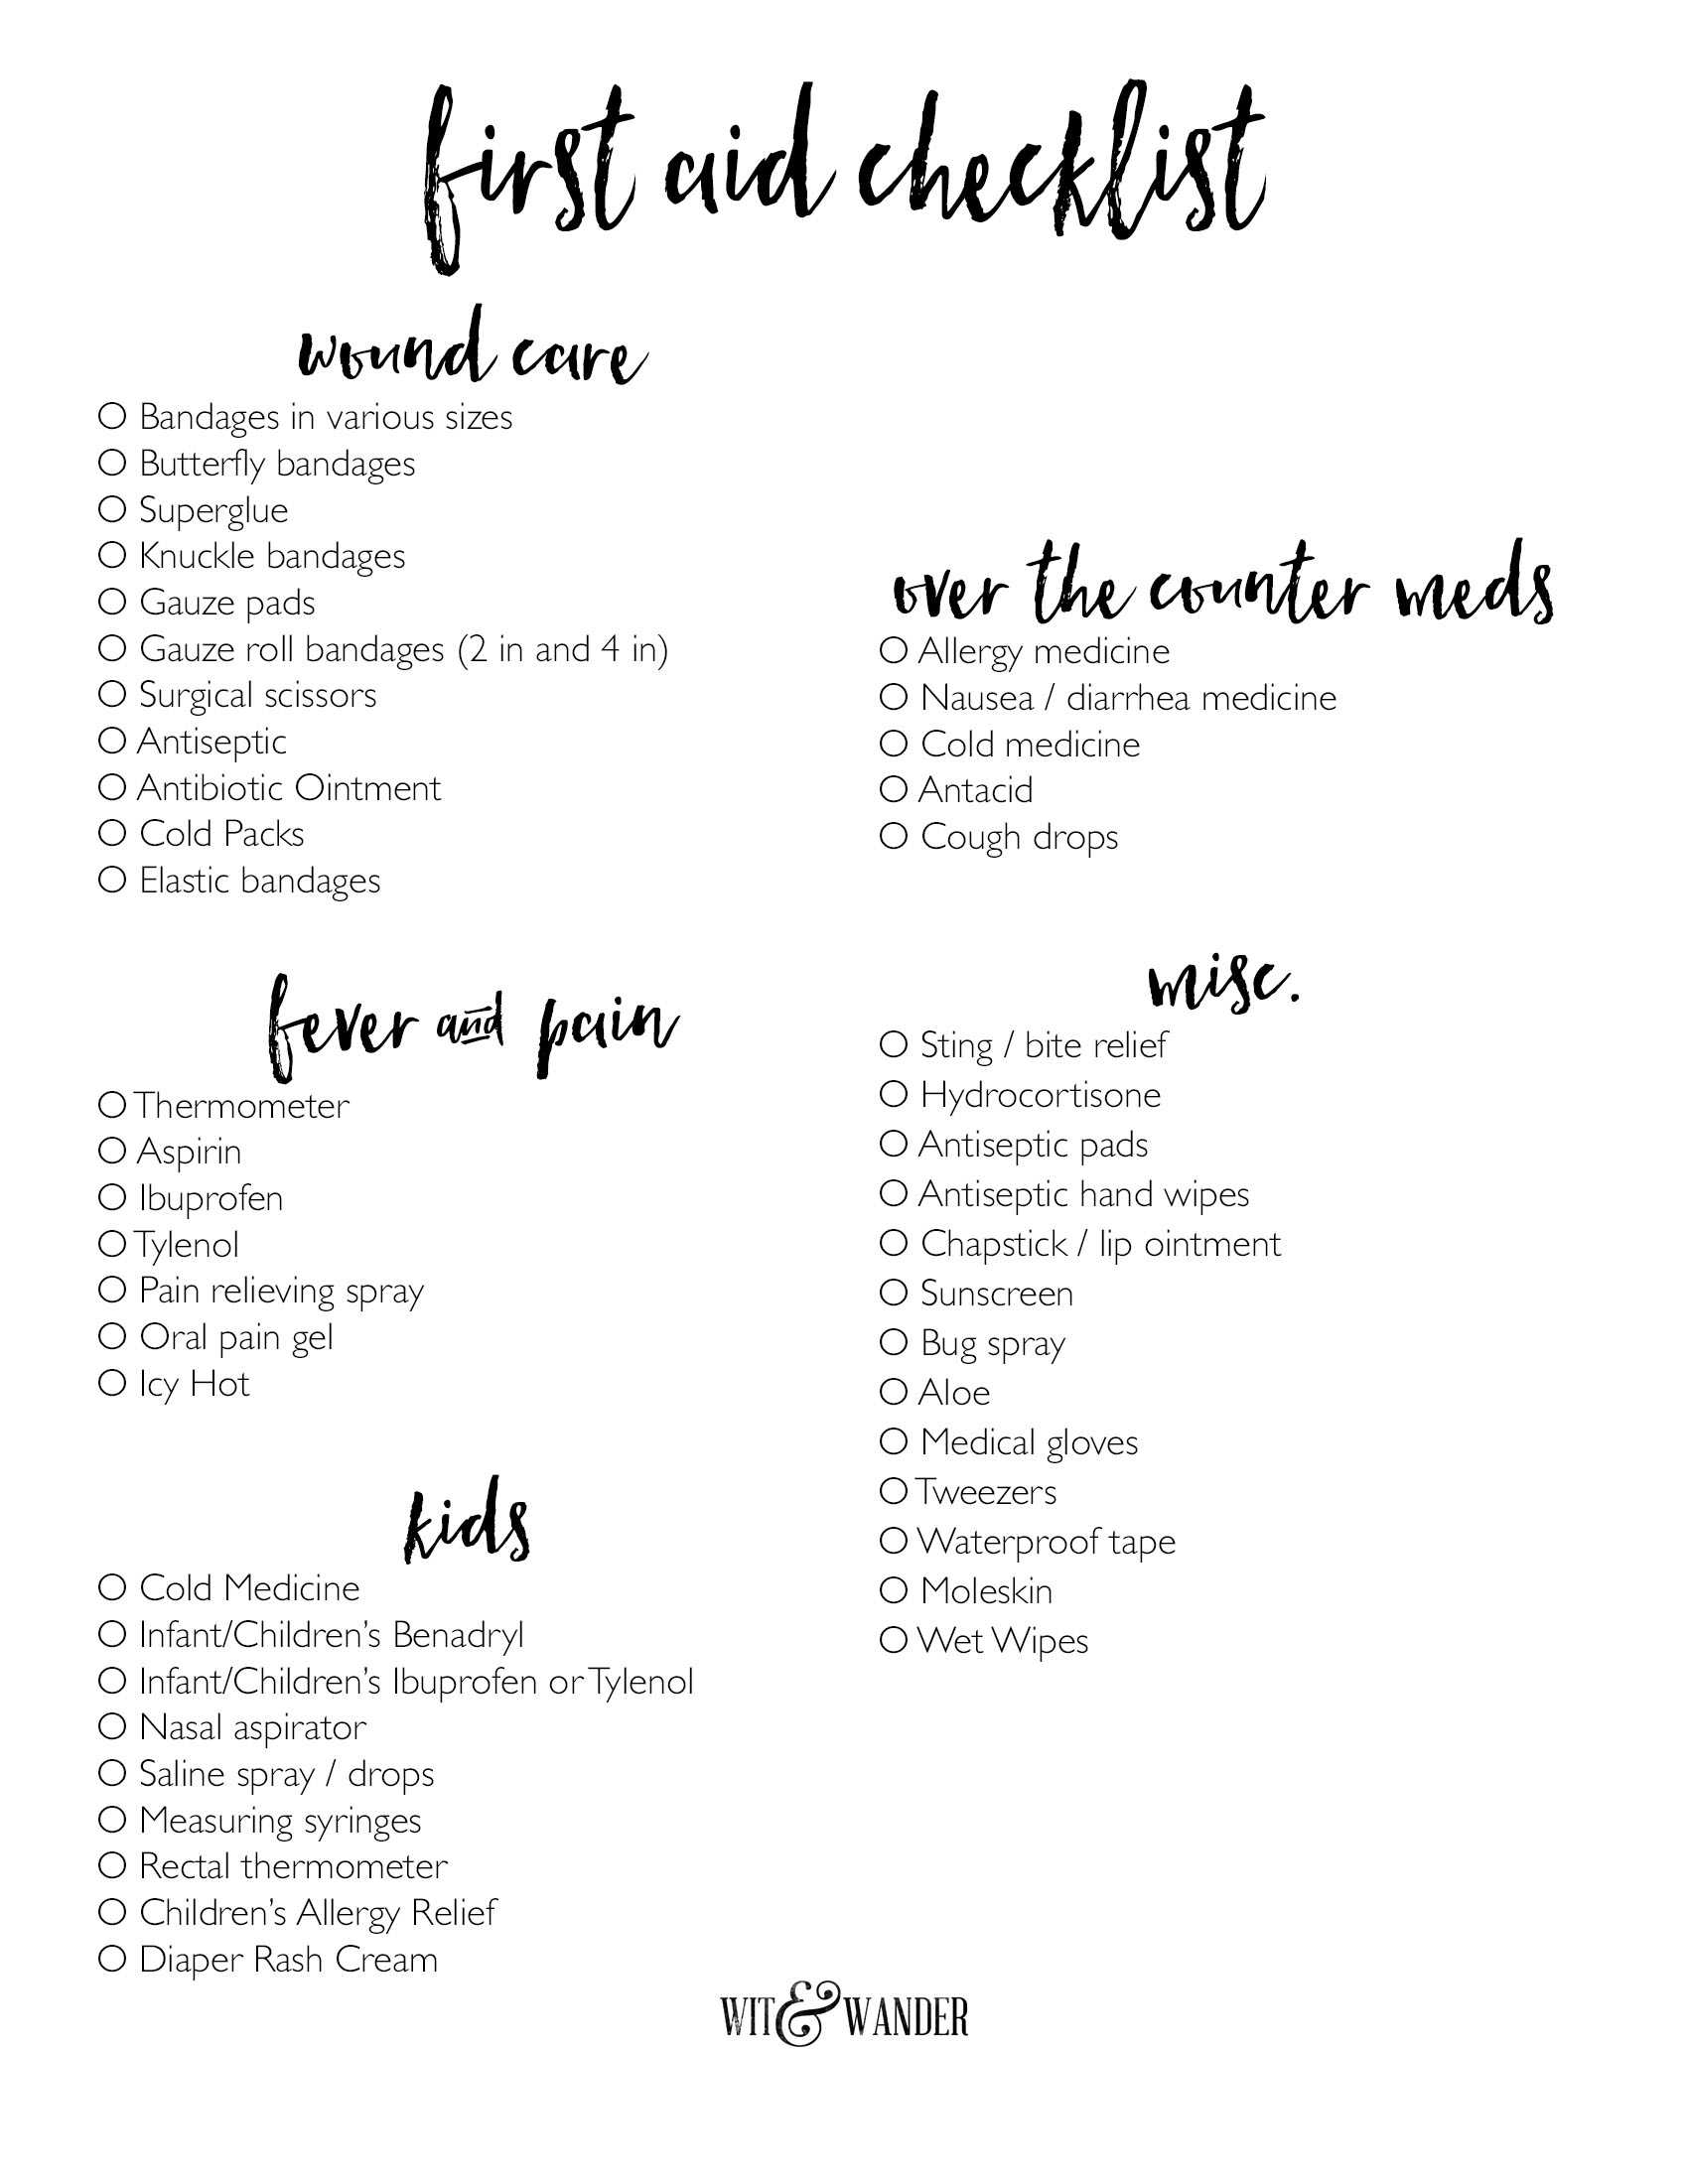 complete first aid kit checklist